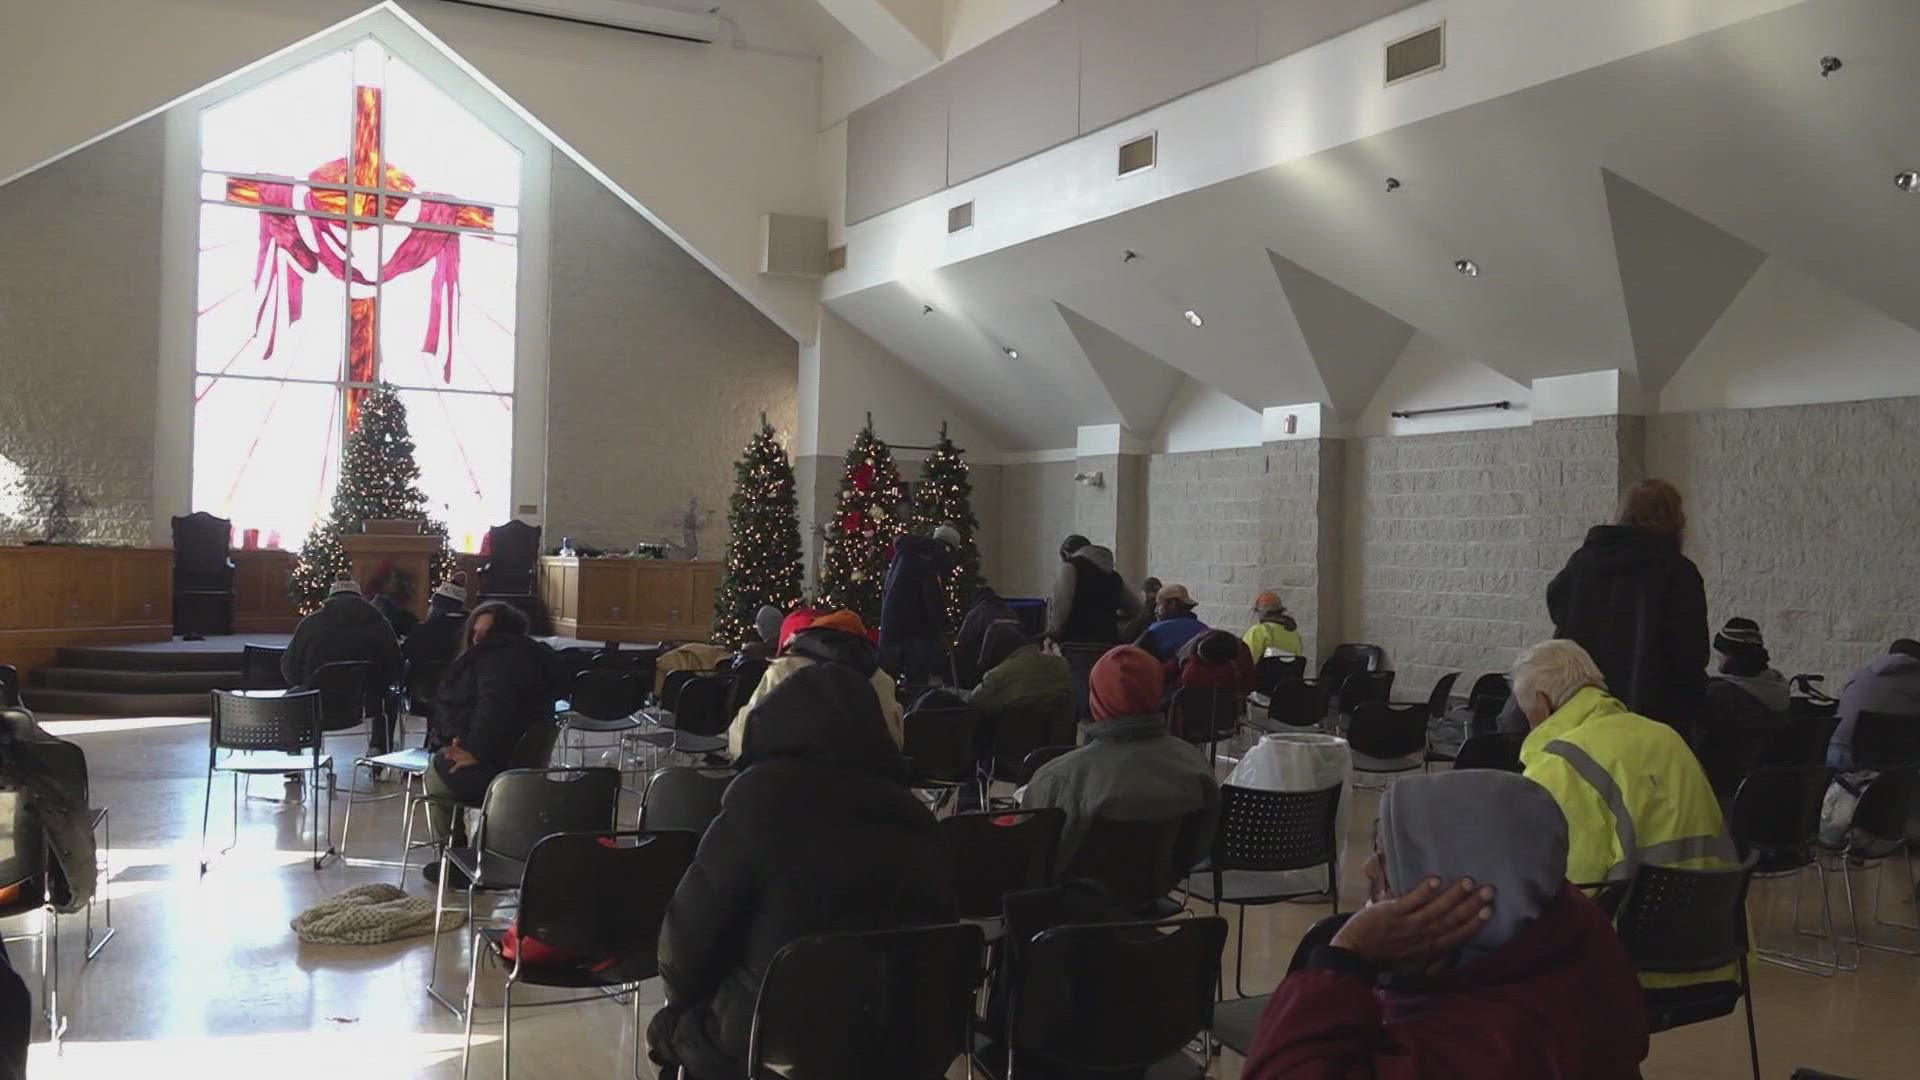 During this extreme cold, a local nonprofit and shelter is seeing more and more people in need of a place to stay and a warm meal.